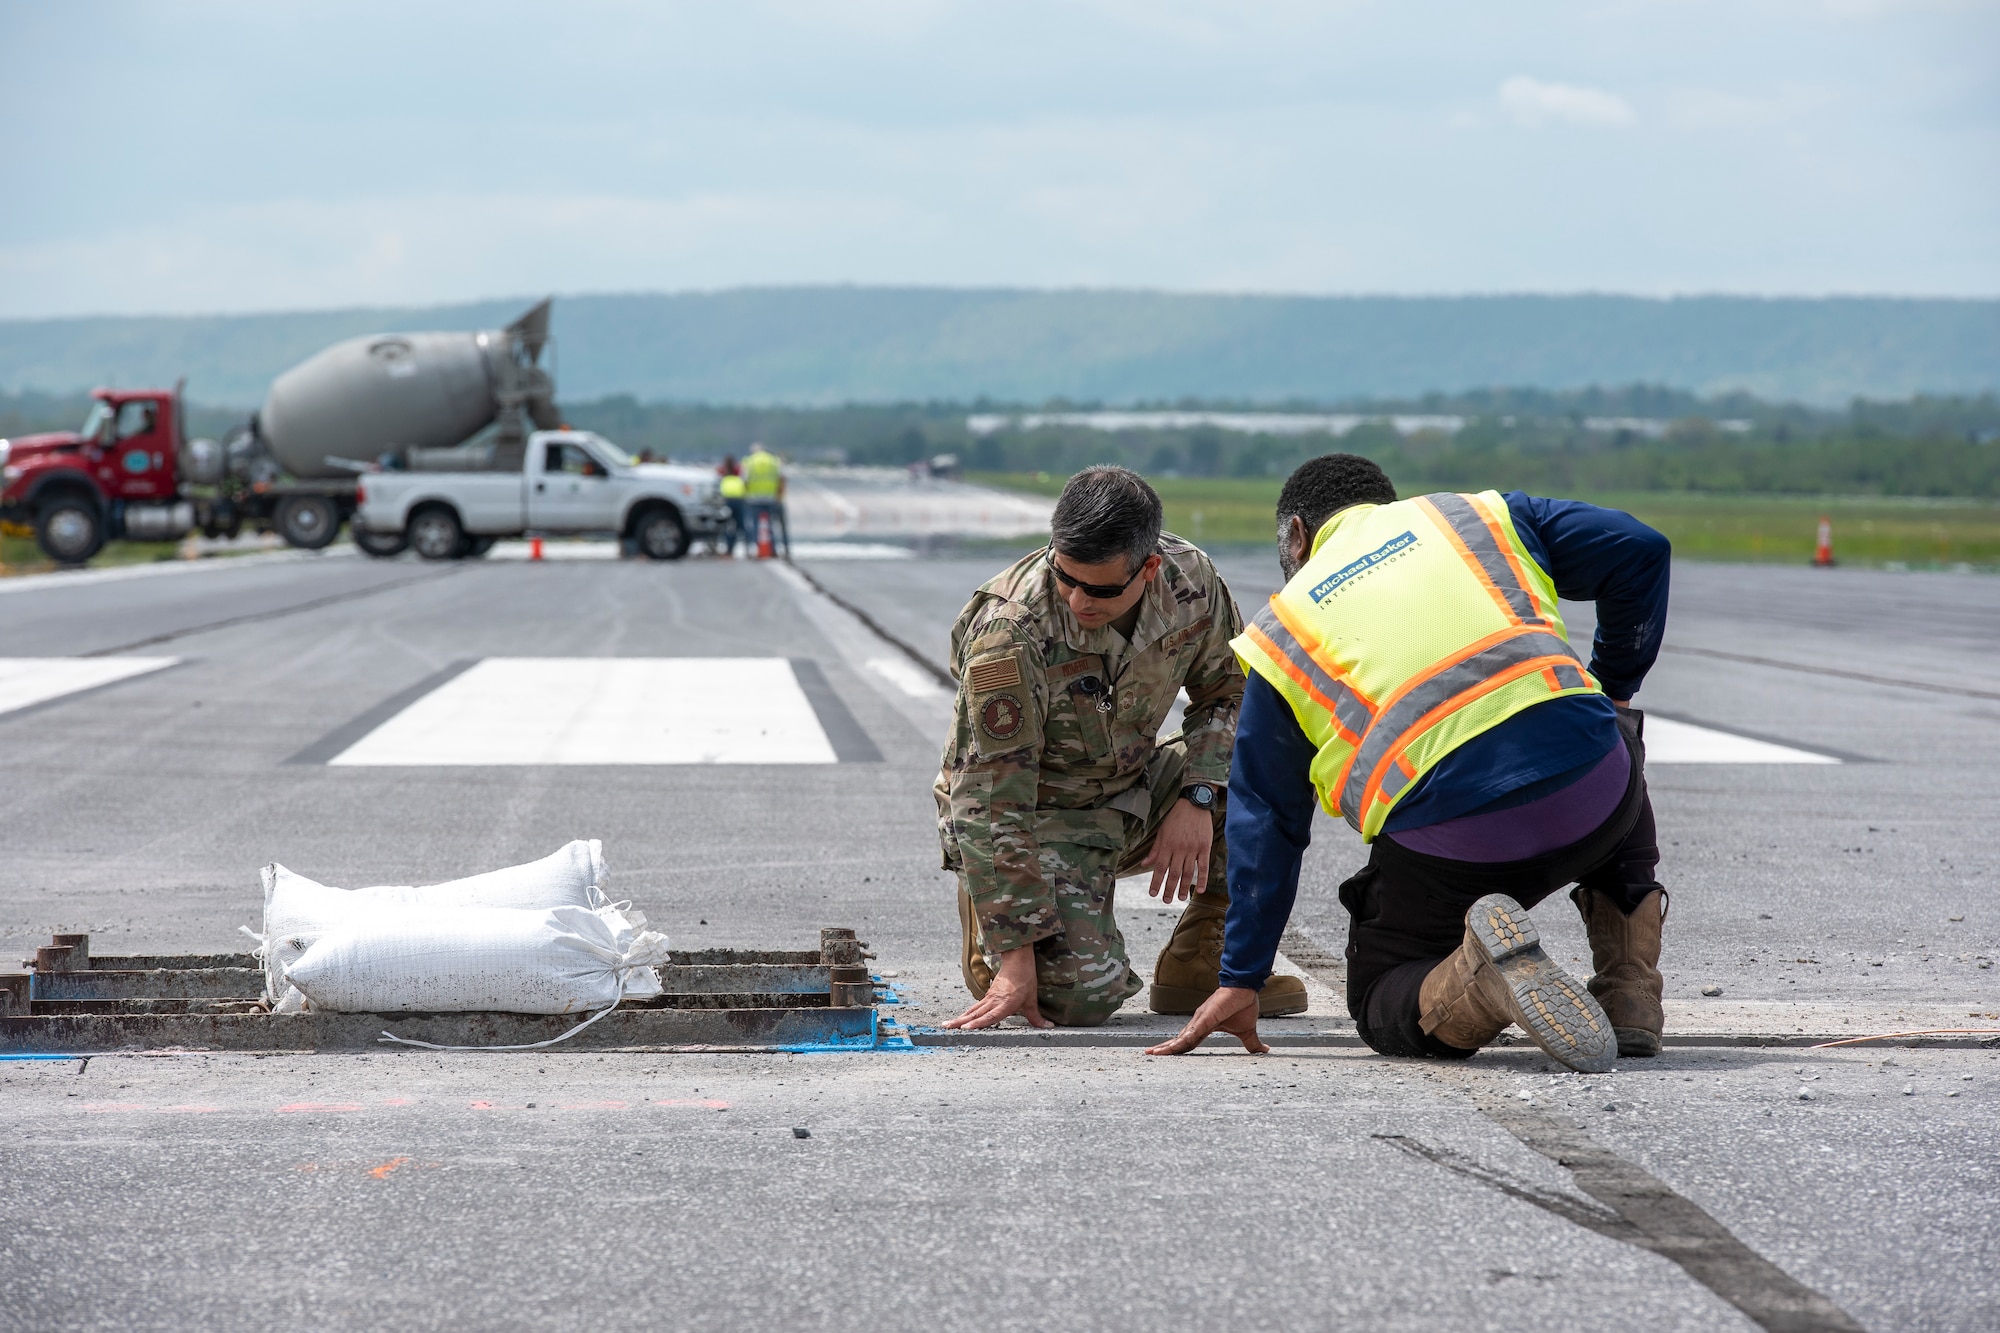 U.S. Air Force Senior Master Sgt. Alan Romero, 167th Airlift Wing airfield manager, and a contractor with engineering firm Michael Baker International, look at a trench dug in the runway at Shepherd Field as part of an airfield lighting upgrade project, May 5, 2022. Lighting on the runway and the military and civilian sides of the airfield are being upgraded as part of a military construction cooperative agreement.